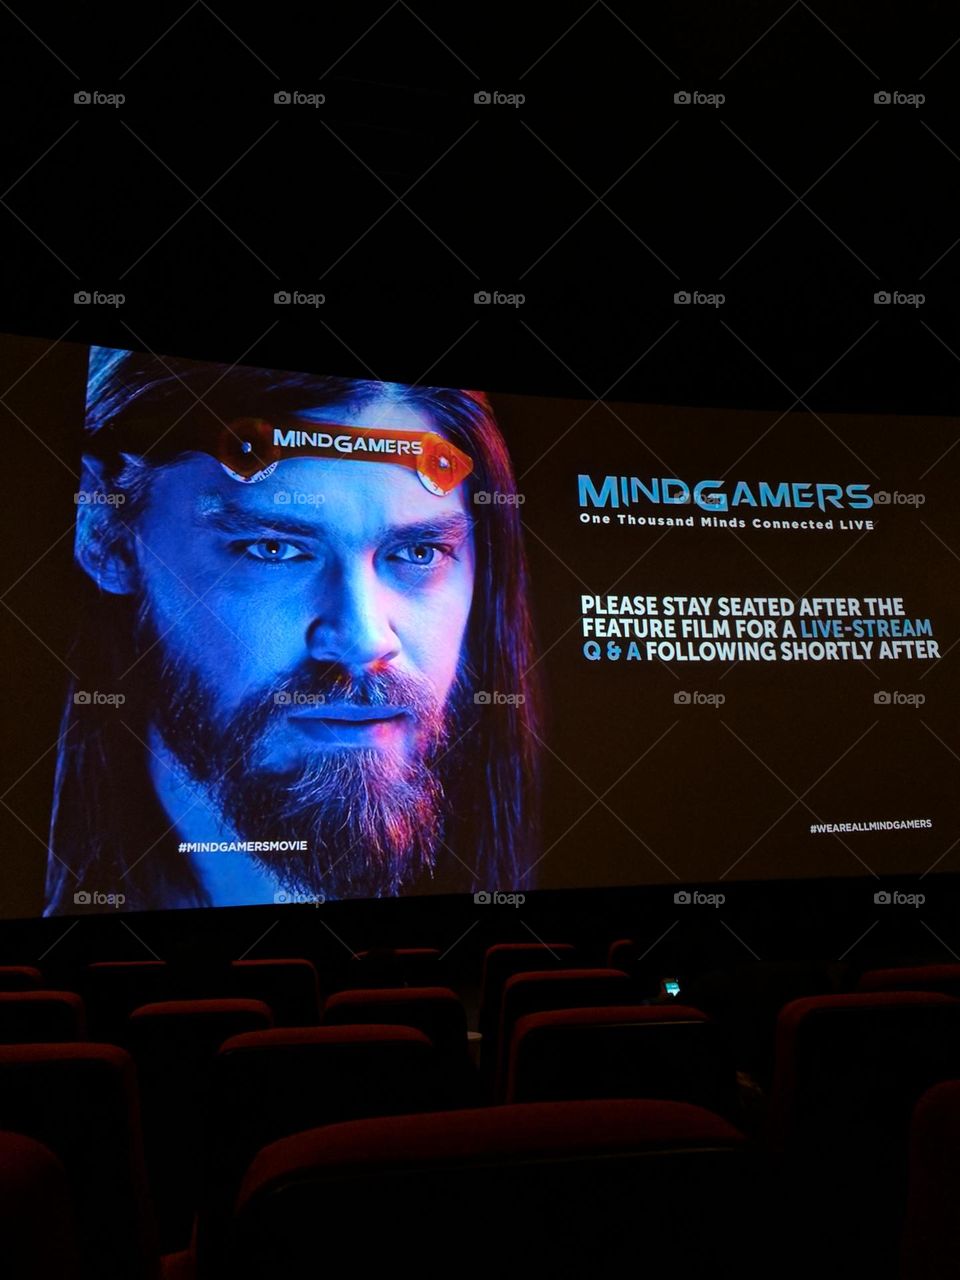 Screening of Mindgamers in a movie theater in New York with red chairs